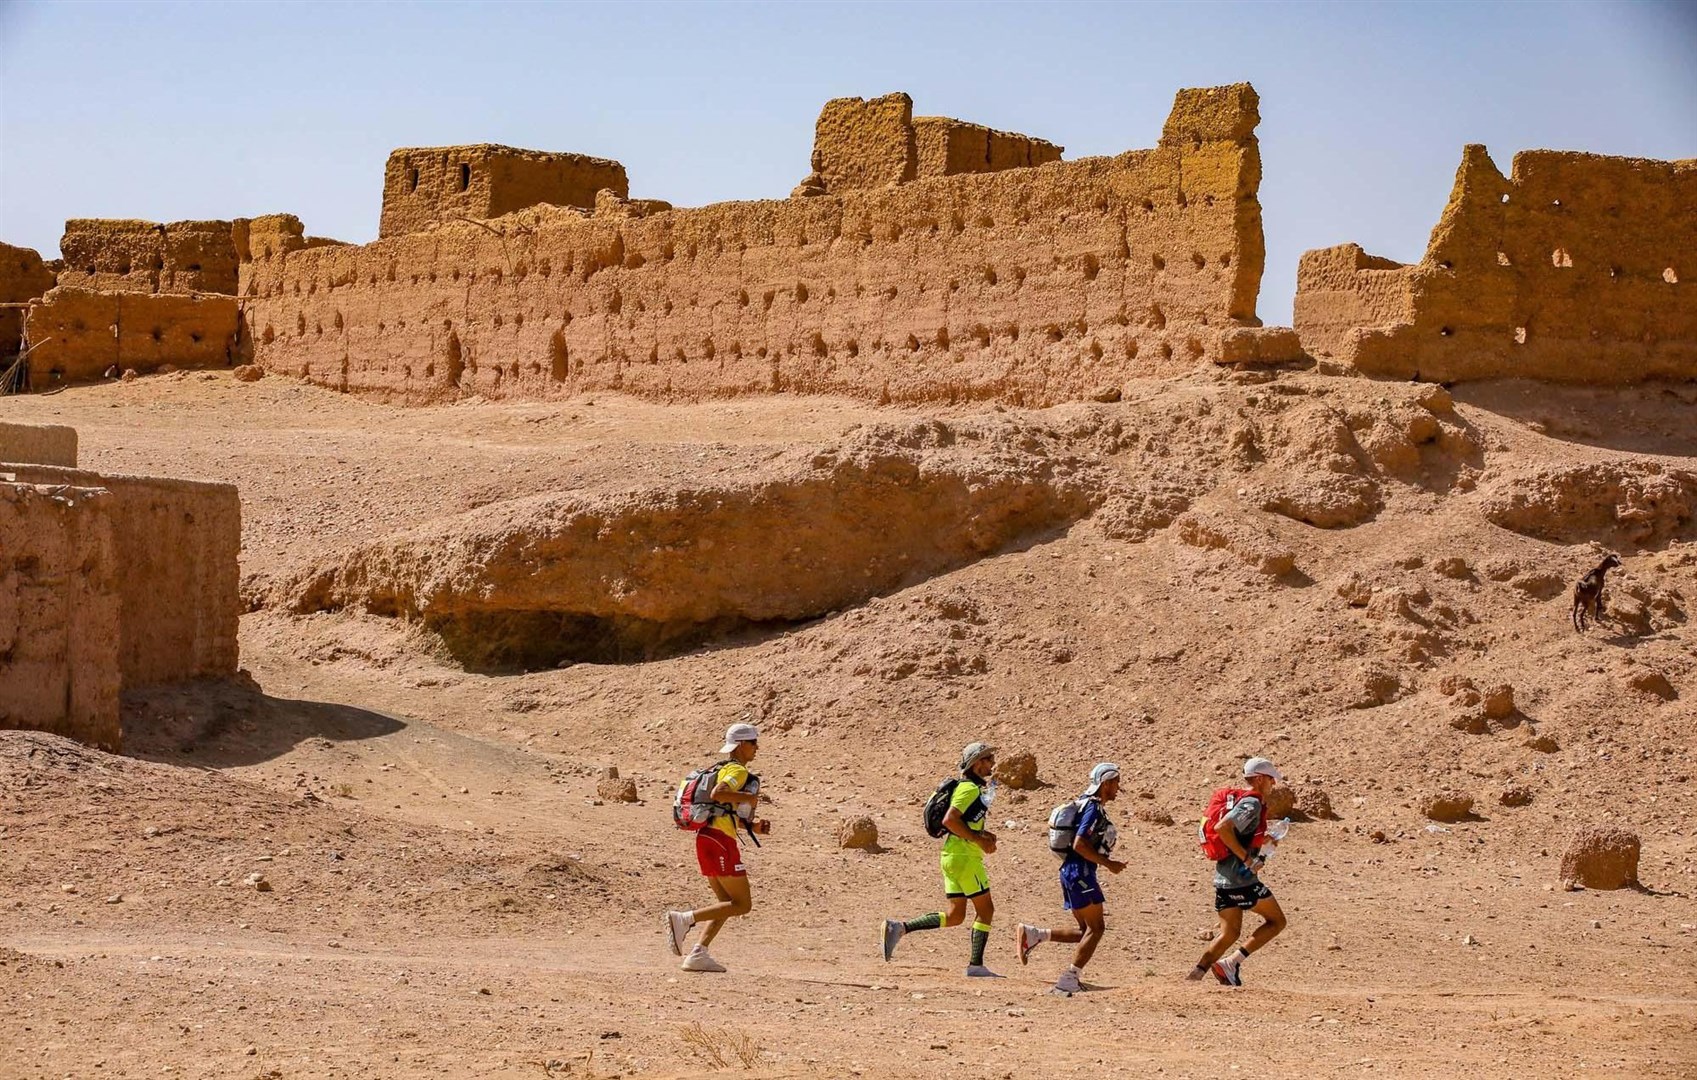 The race takes place in the Sahara over six days